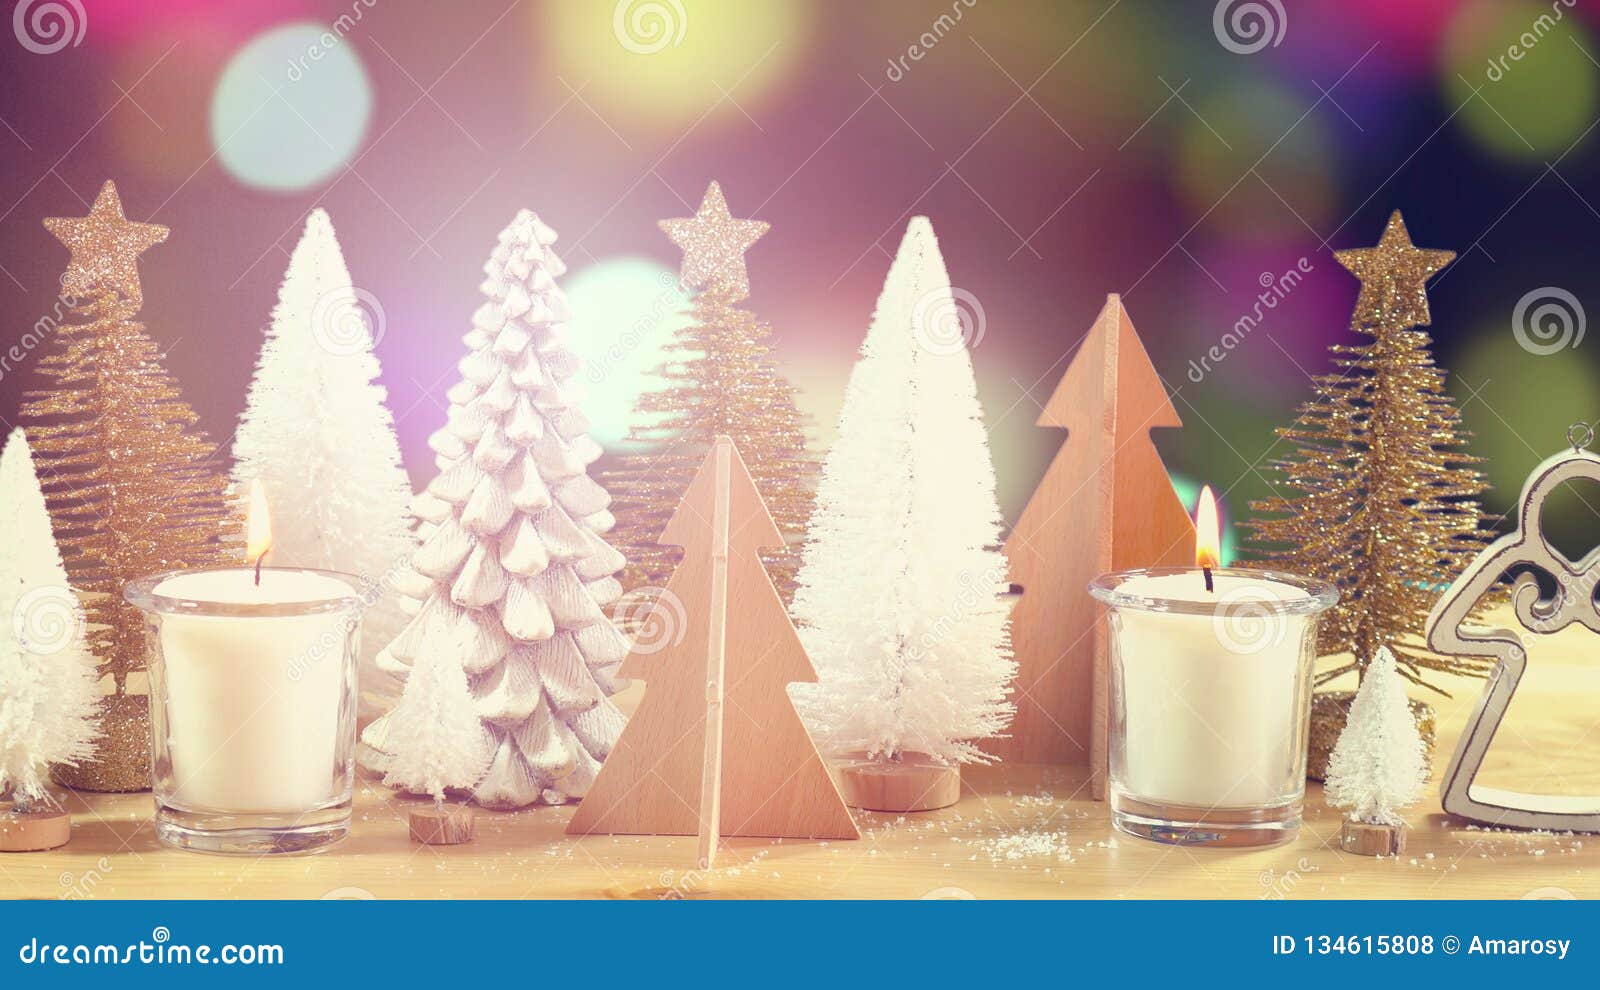 Row of Christmas Tree Ornaments in Front of Bokeh Lights. Stock Photo ...